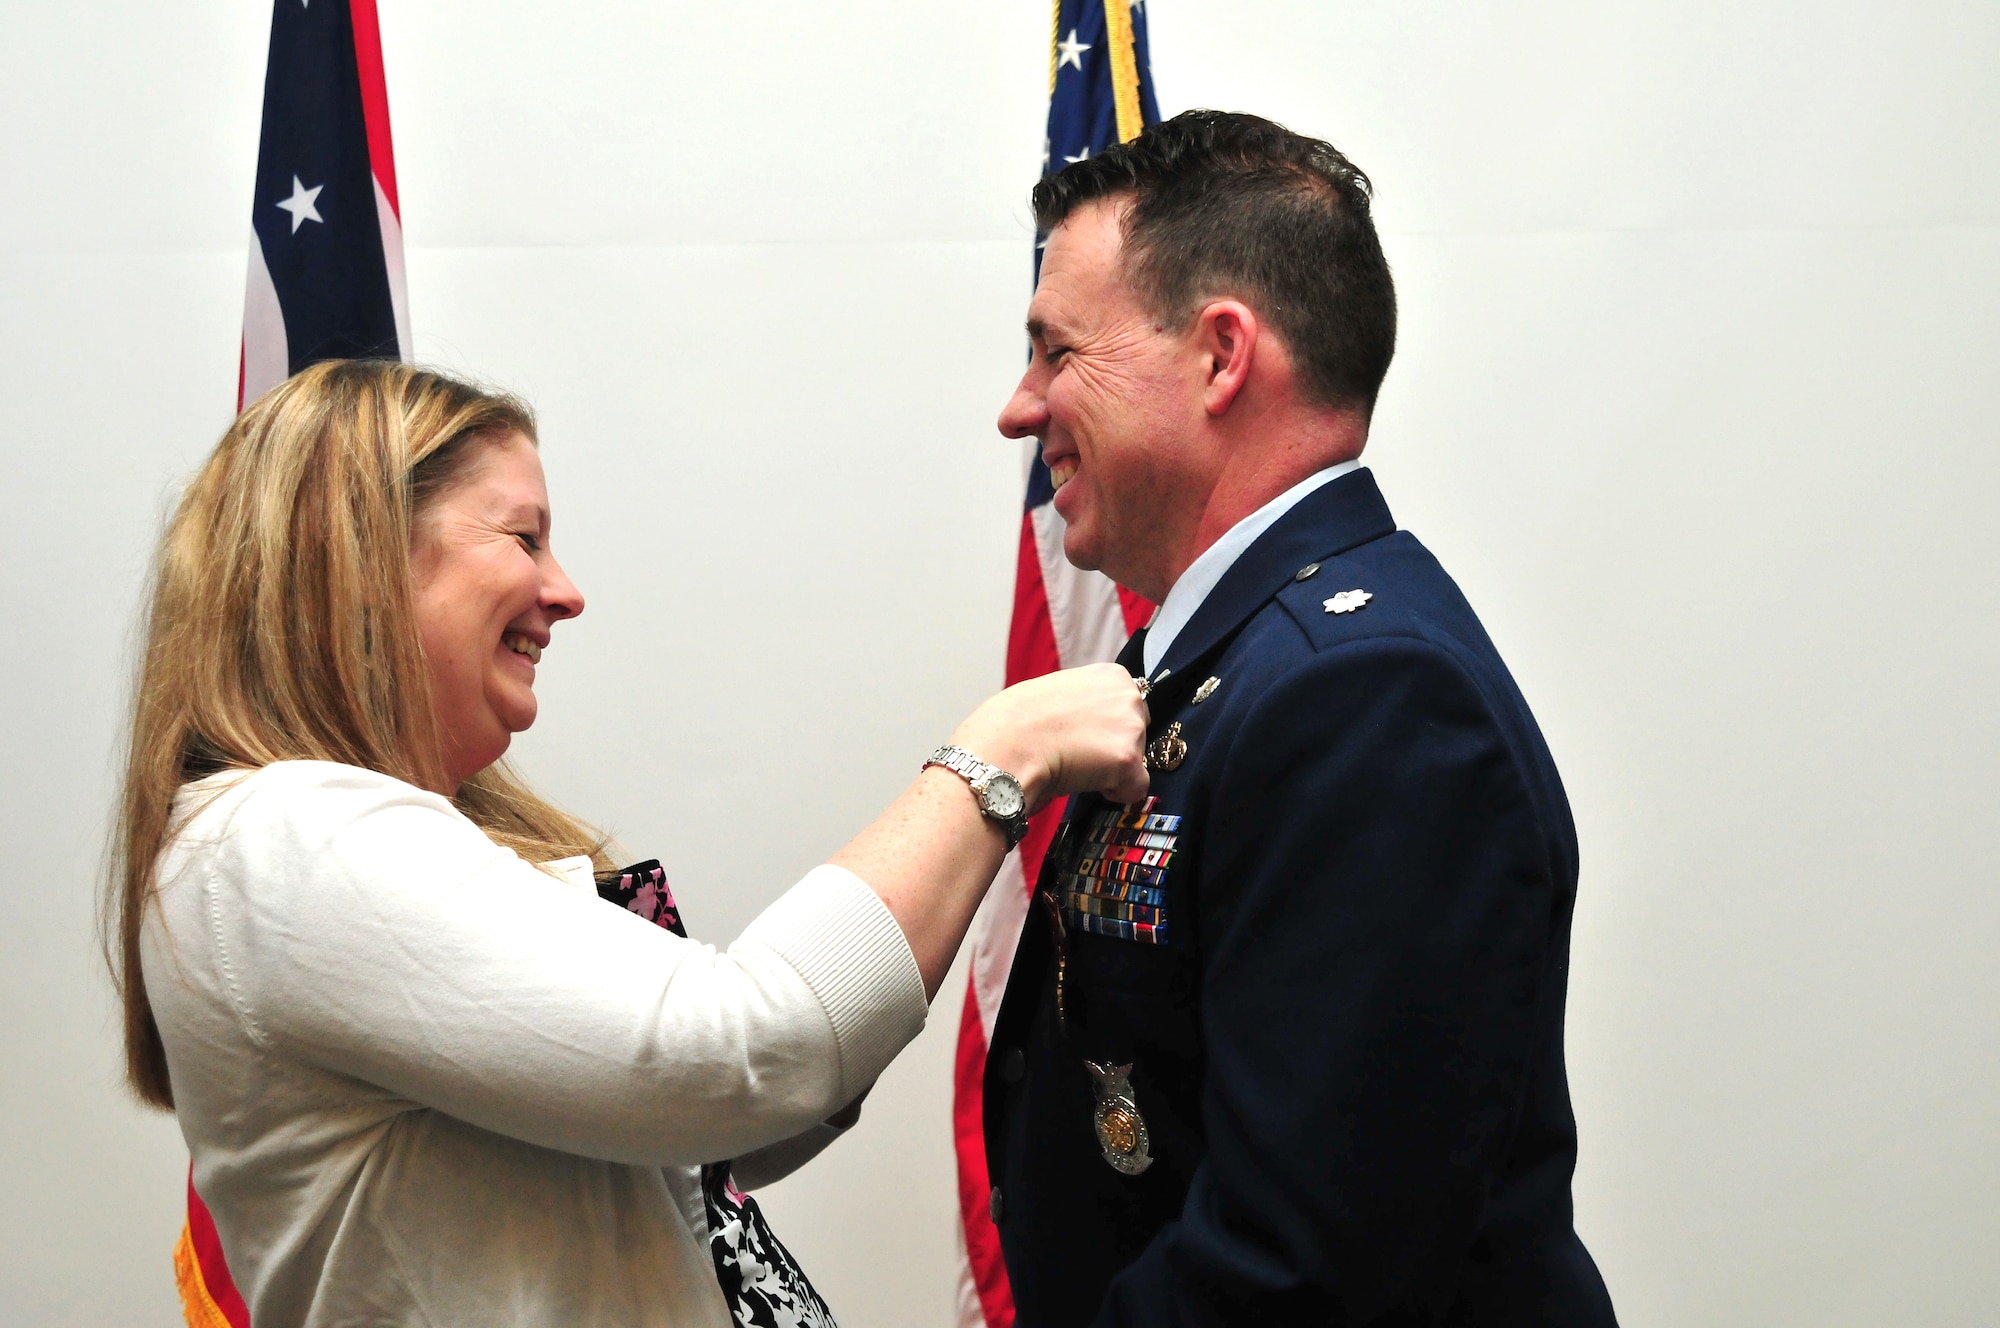 Melanie Craig, the wife of Lt. Col. Matthew Craig, presents her husband with a pin to honor his retirement from the 178th Wing at Springfield Air National Guard Base, Ohio, March 6, 2016. Craig, the 178th Wing Civil Engineering Squadron commander, enlisted in the U.S. Air Force in 1992 and received his commission in 1998. During his time as commander, he worked on several major construction projects to ensure base facilities met the needs of the 178th Wing's mission change. (Ohio Air National Guard photo by Airman 1st Class Rachel Simones)